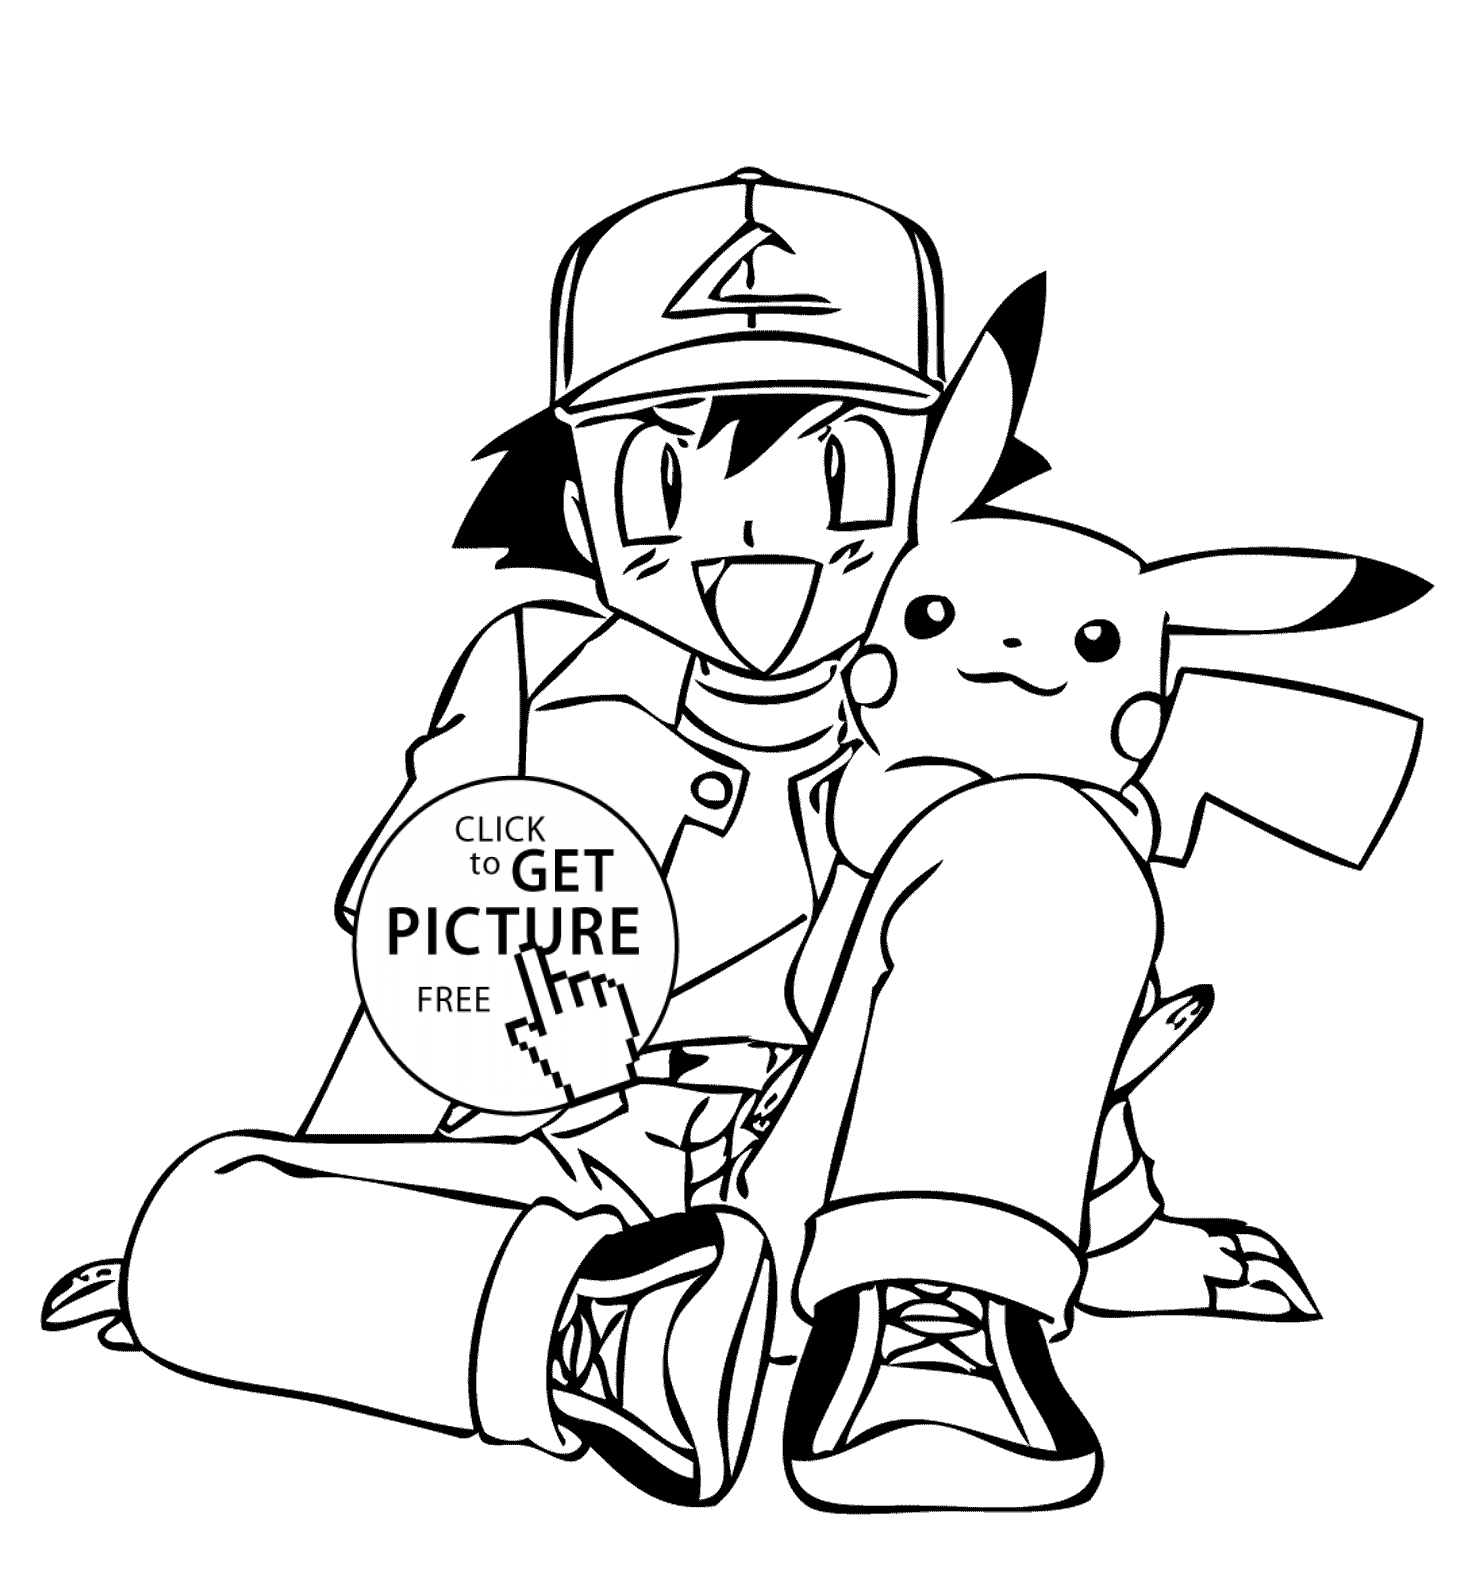 free online coloring pages pokemon black white cute pokemon coloring pages getcoloringpagescom coloring online white pokemon free black pages 